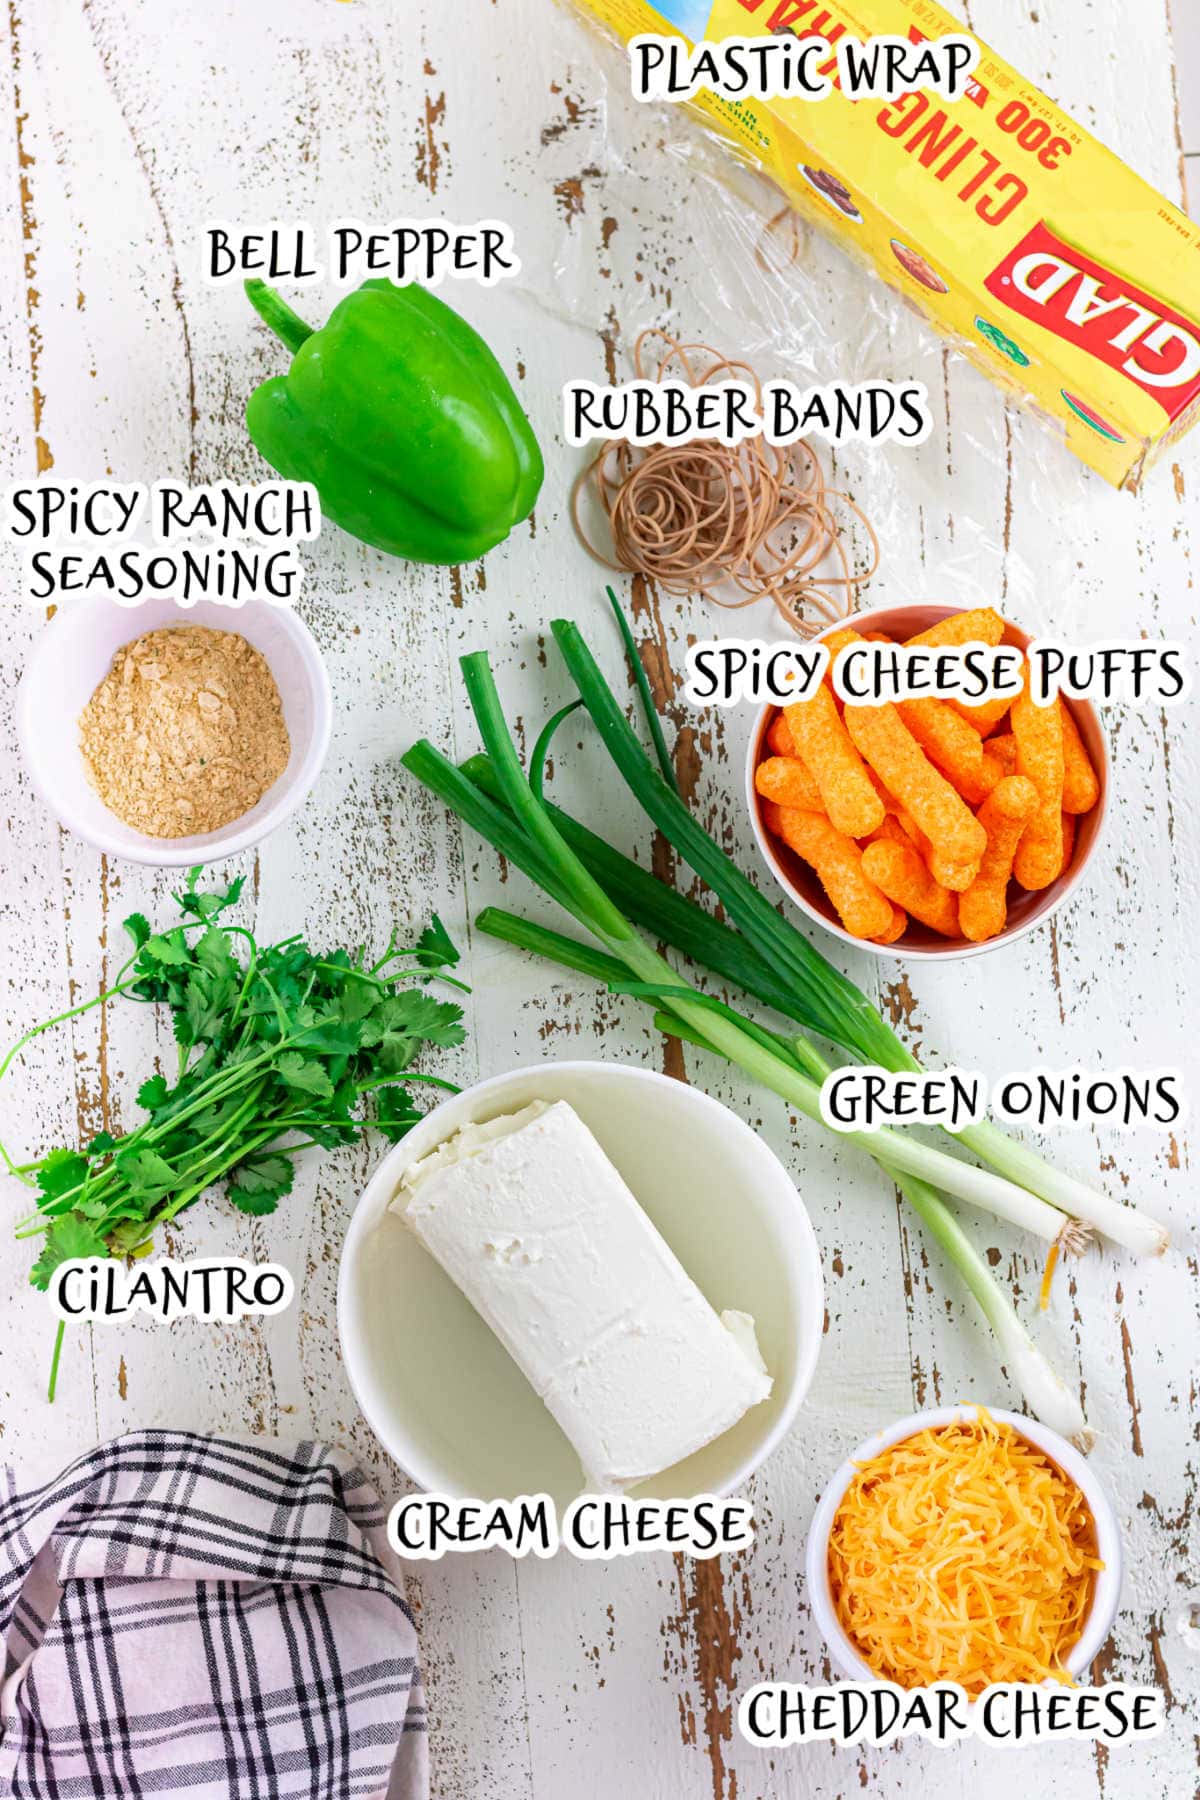 Labeled ingredients for this cheeseball recipe.